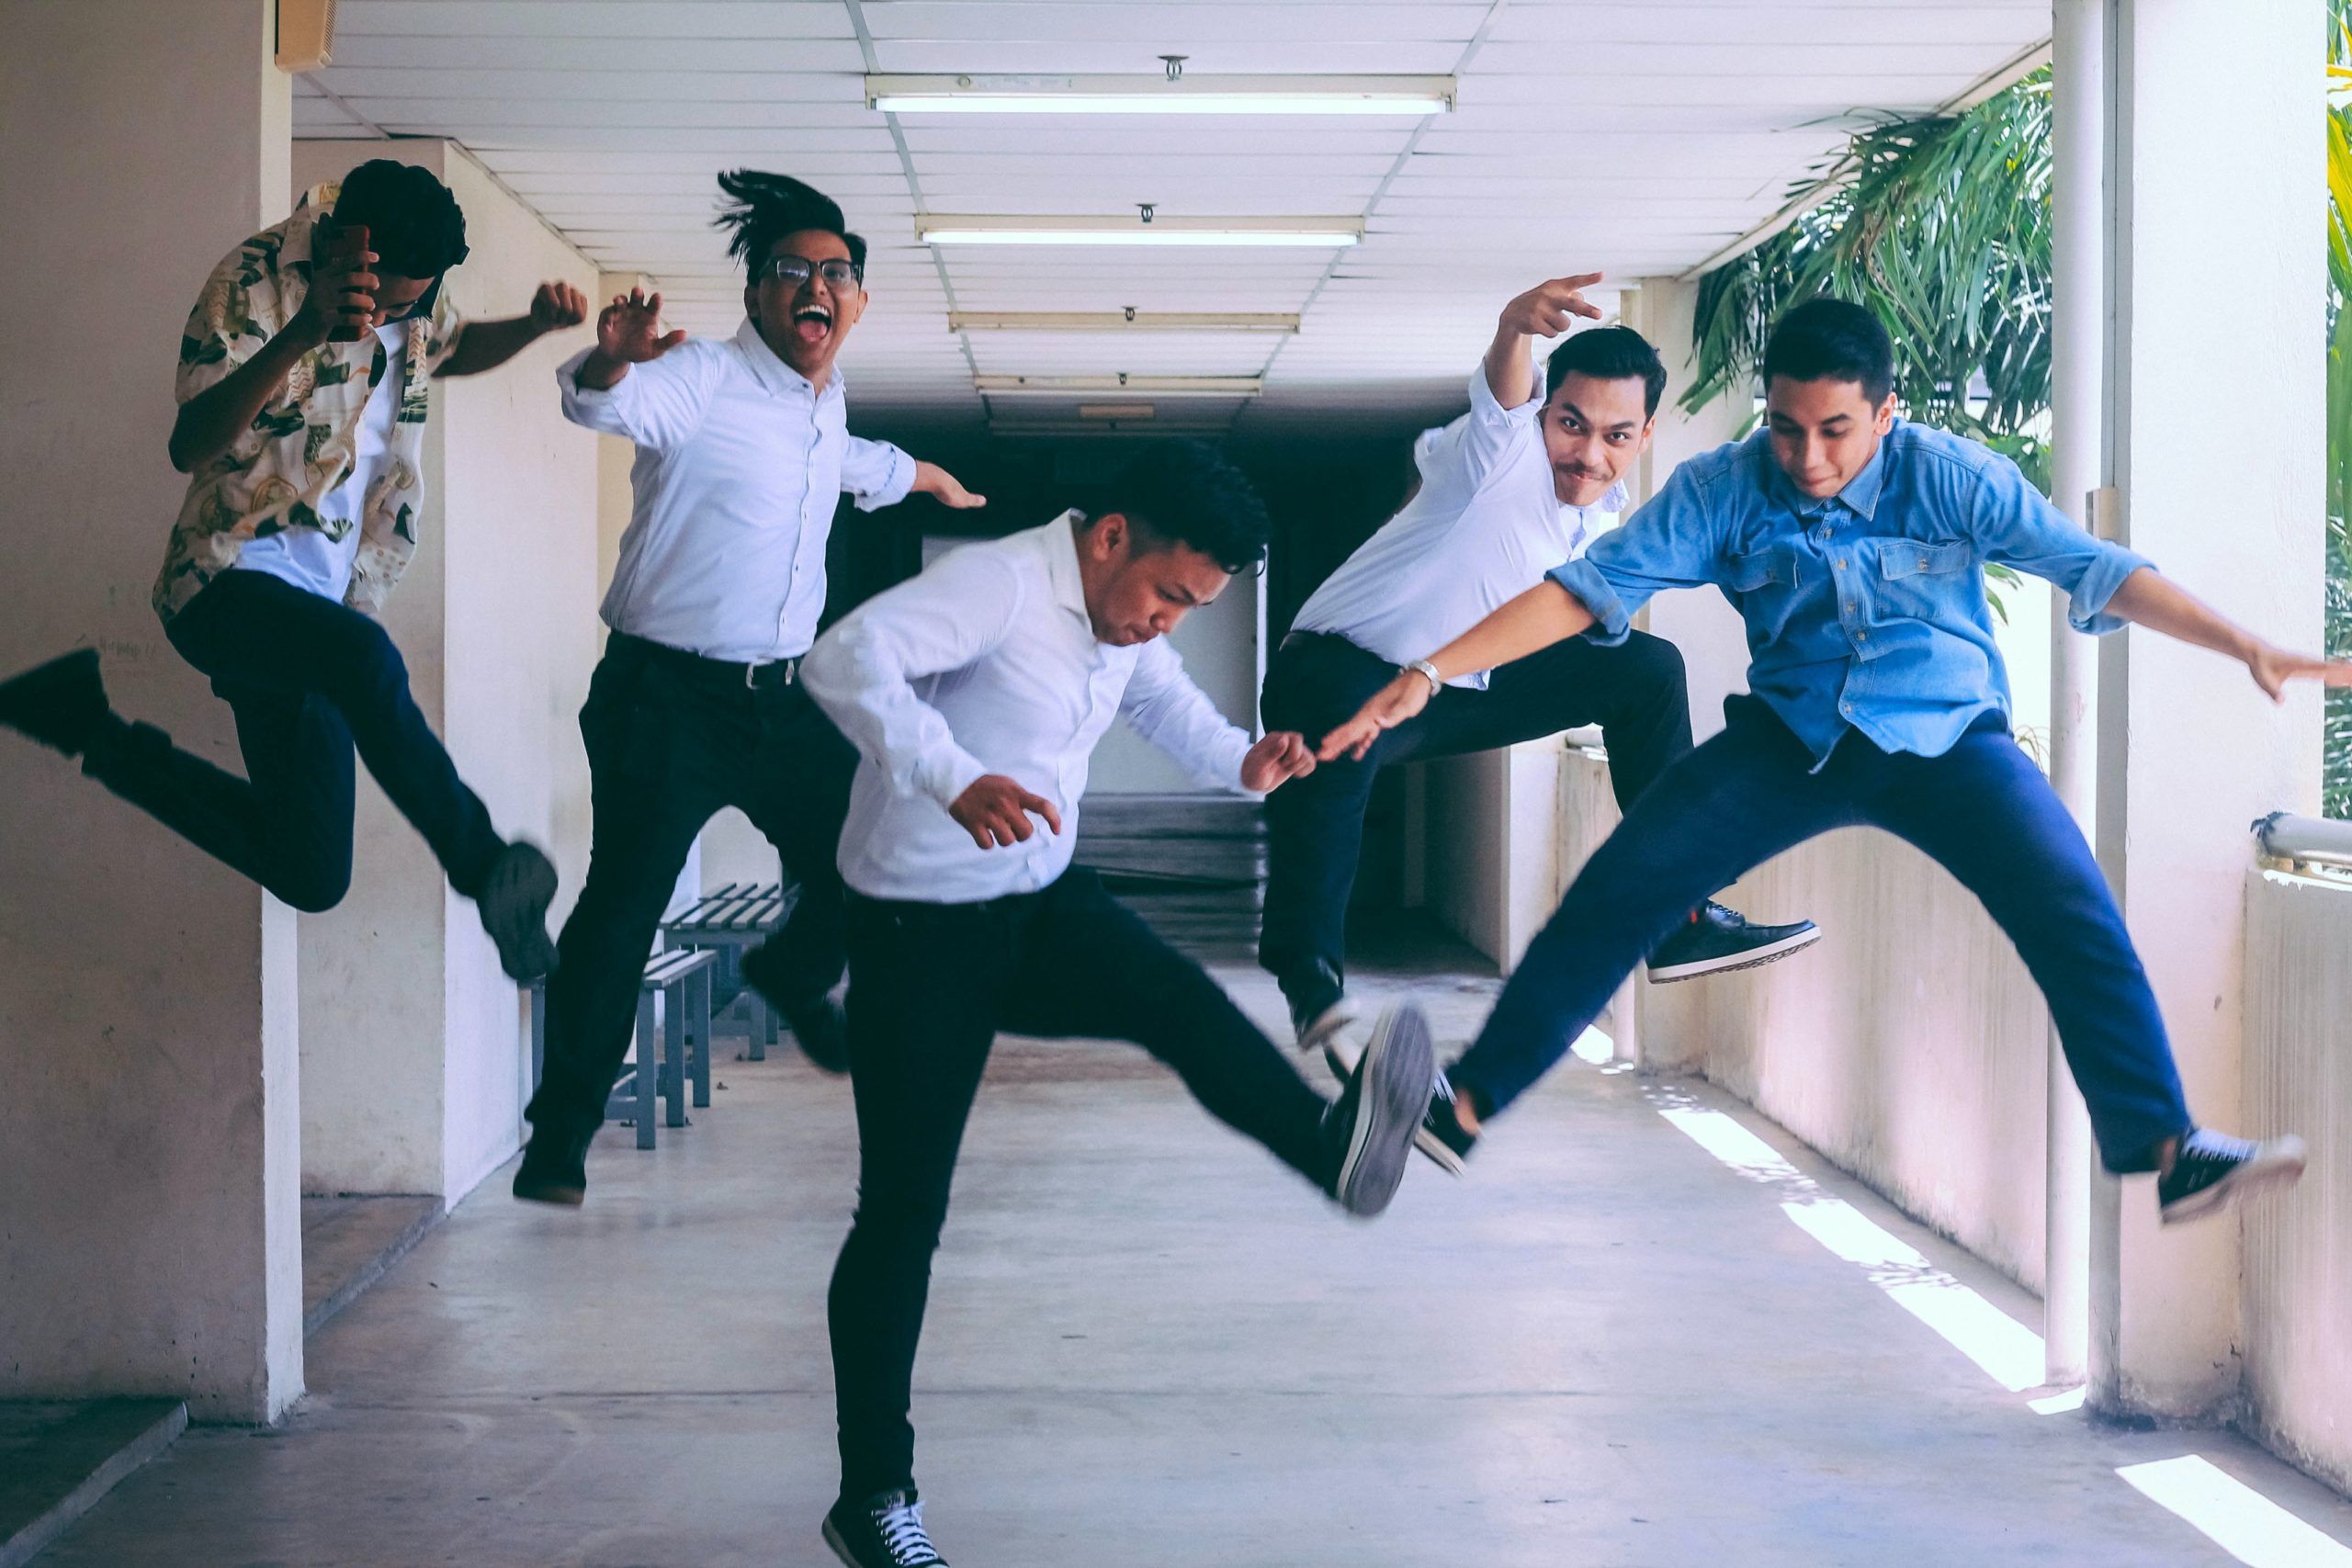 Image of group of men jumping in office building